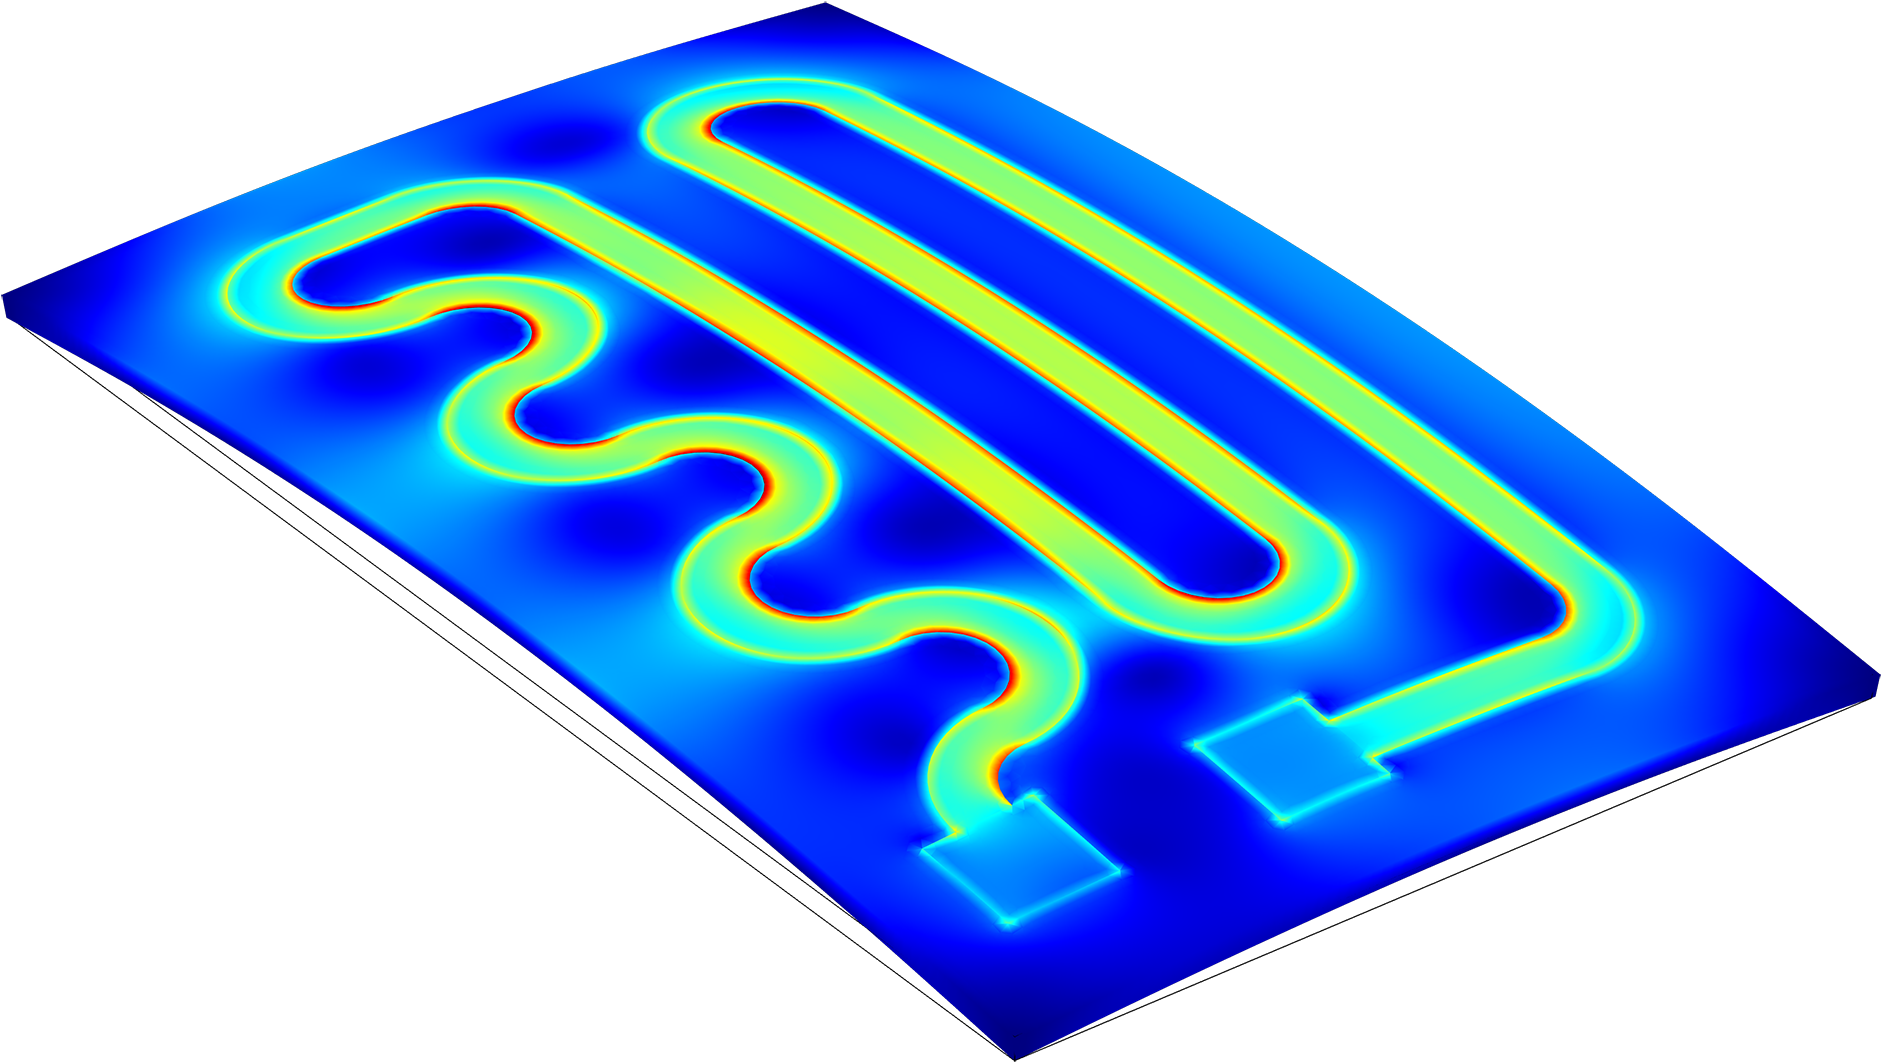 Example Of Stress In A Heating Circuit As A Result - Joule Effect (1920x1112)